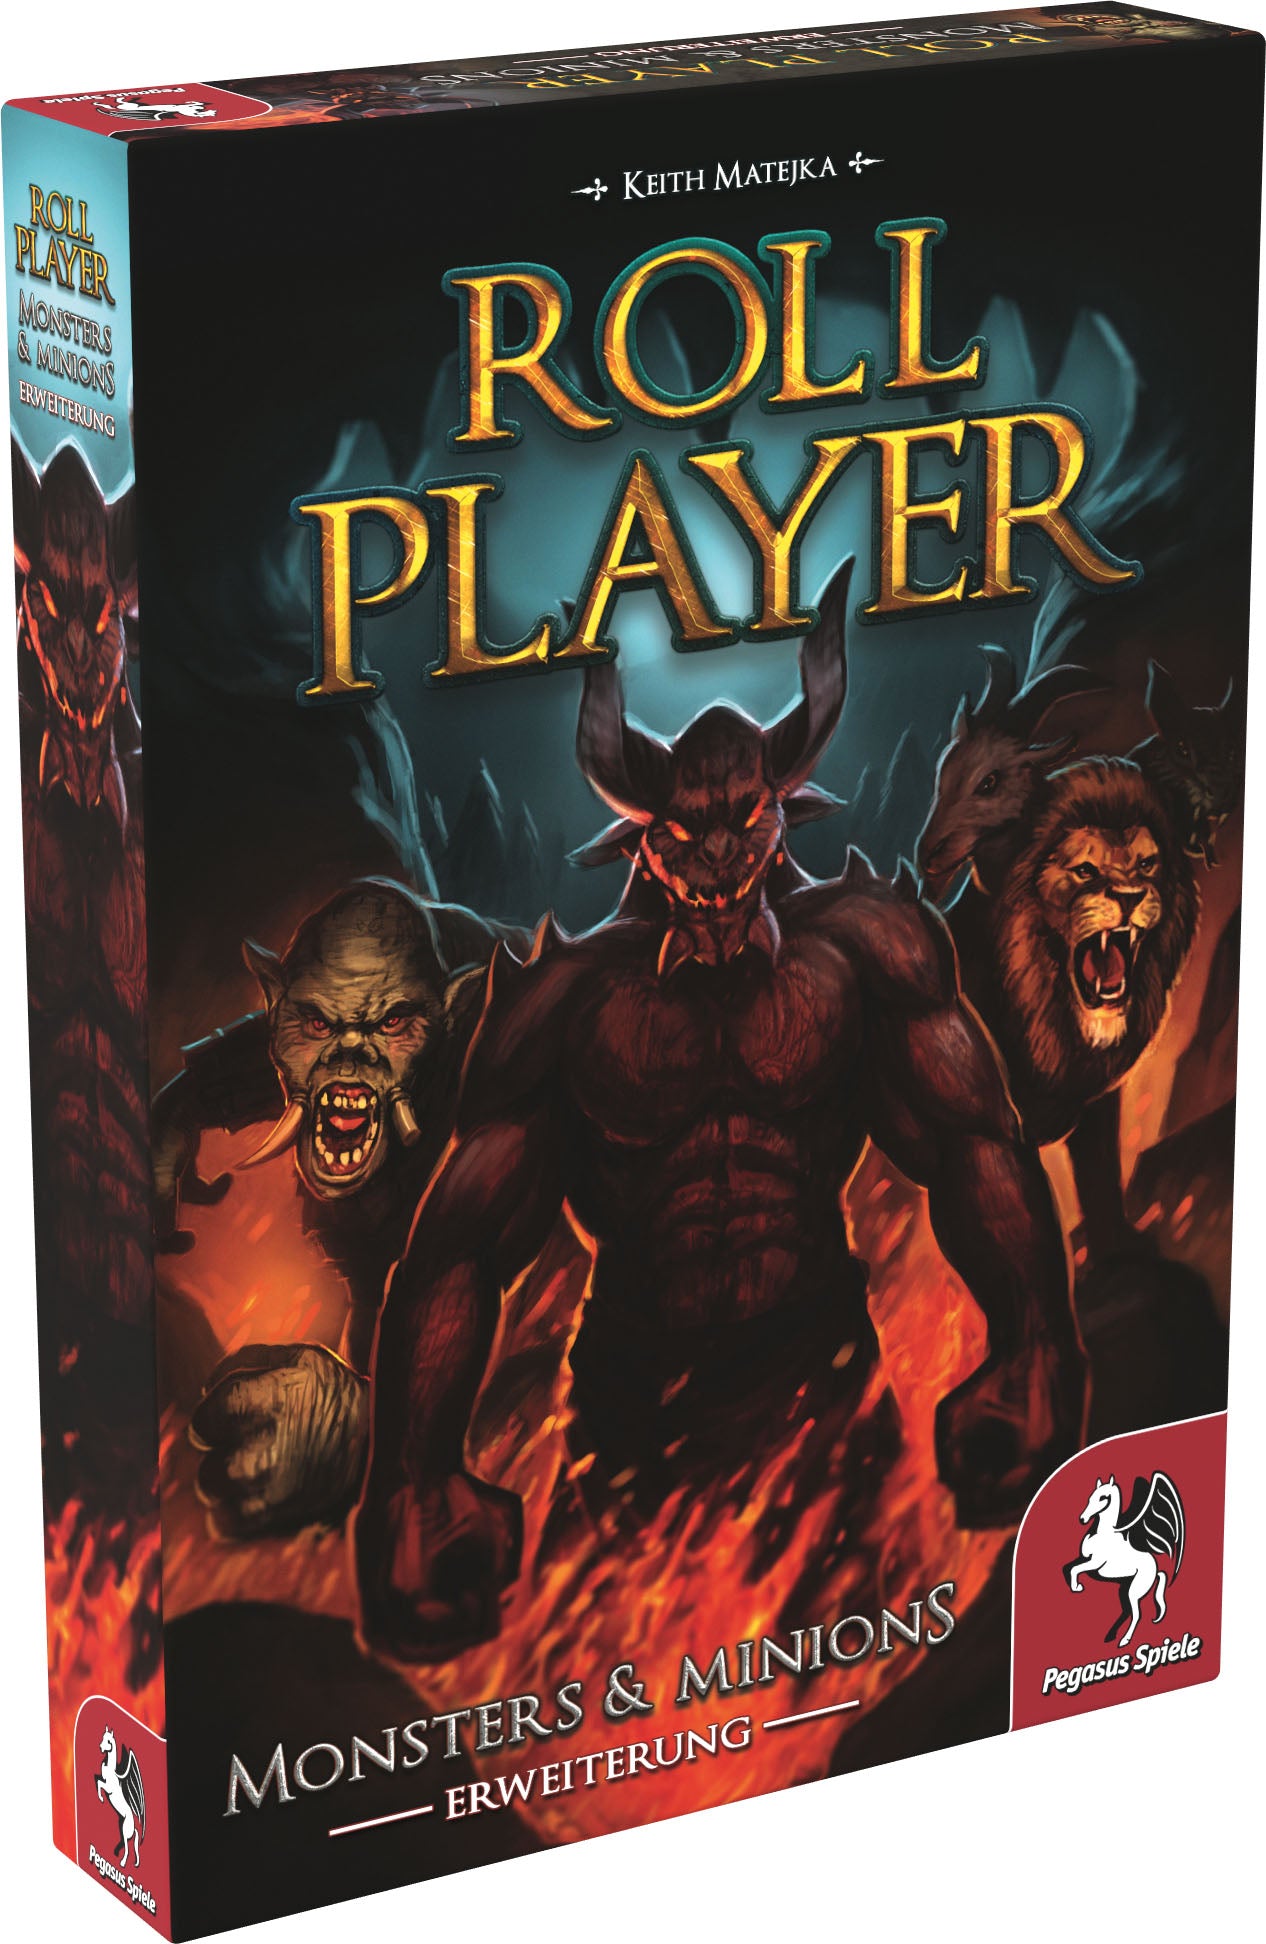 Roll Player - Monster & Minions